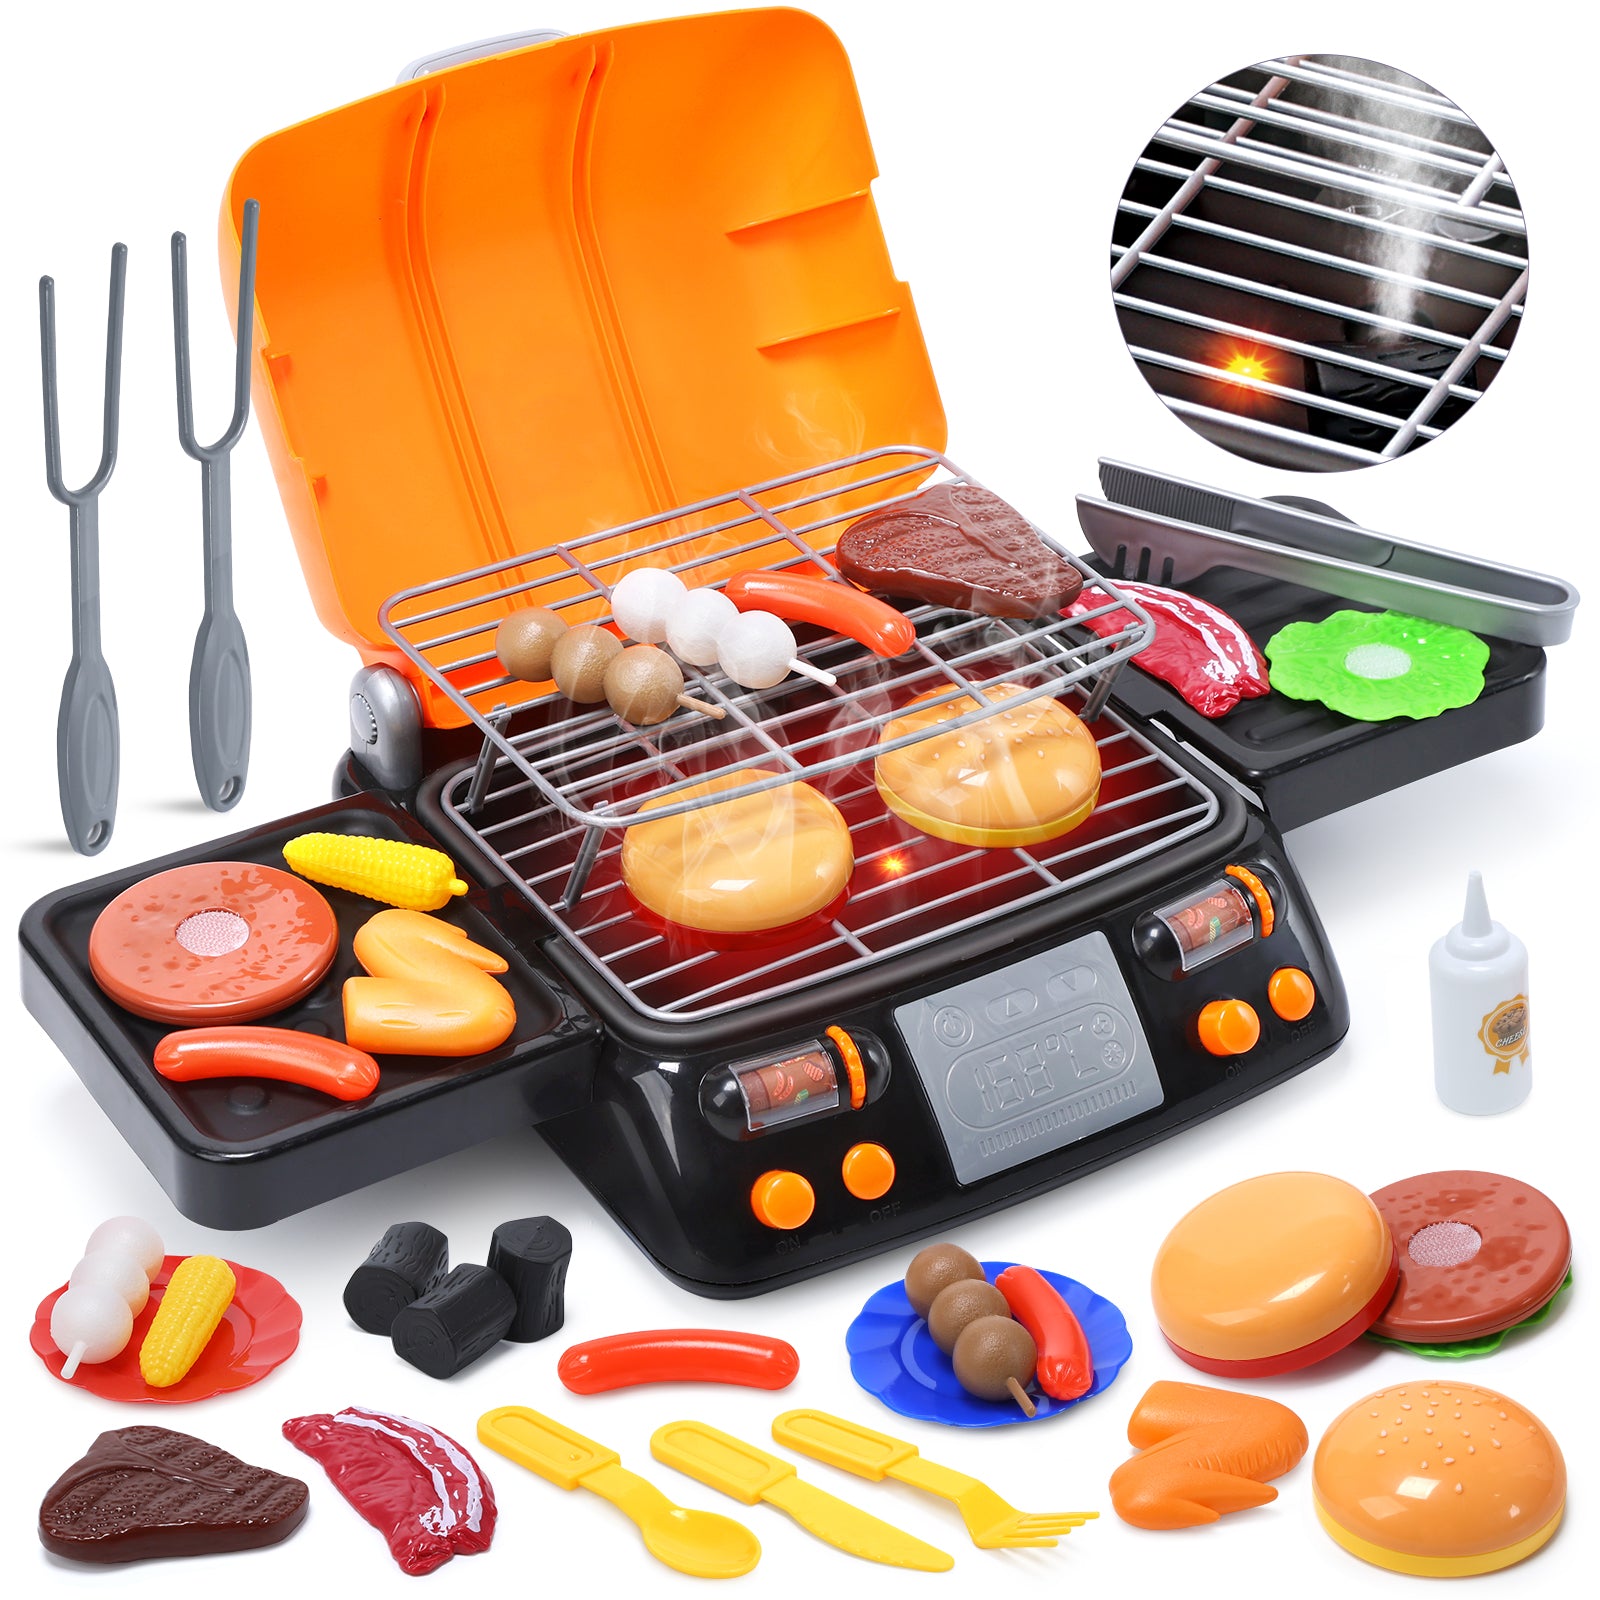 CUTE STONE Cooking Toy BBQ Set, 2-Layer Kids Grill Playset with Play Food, Pretend Smoke Sound and Light, Kitchen Accessories Utensils Toy, Outdoor Camping Barbecue Toys Gift for Toddlers Girls Boys